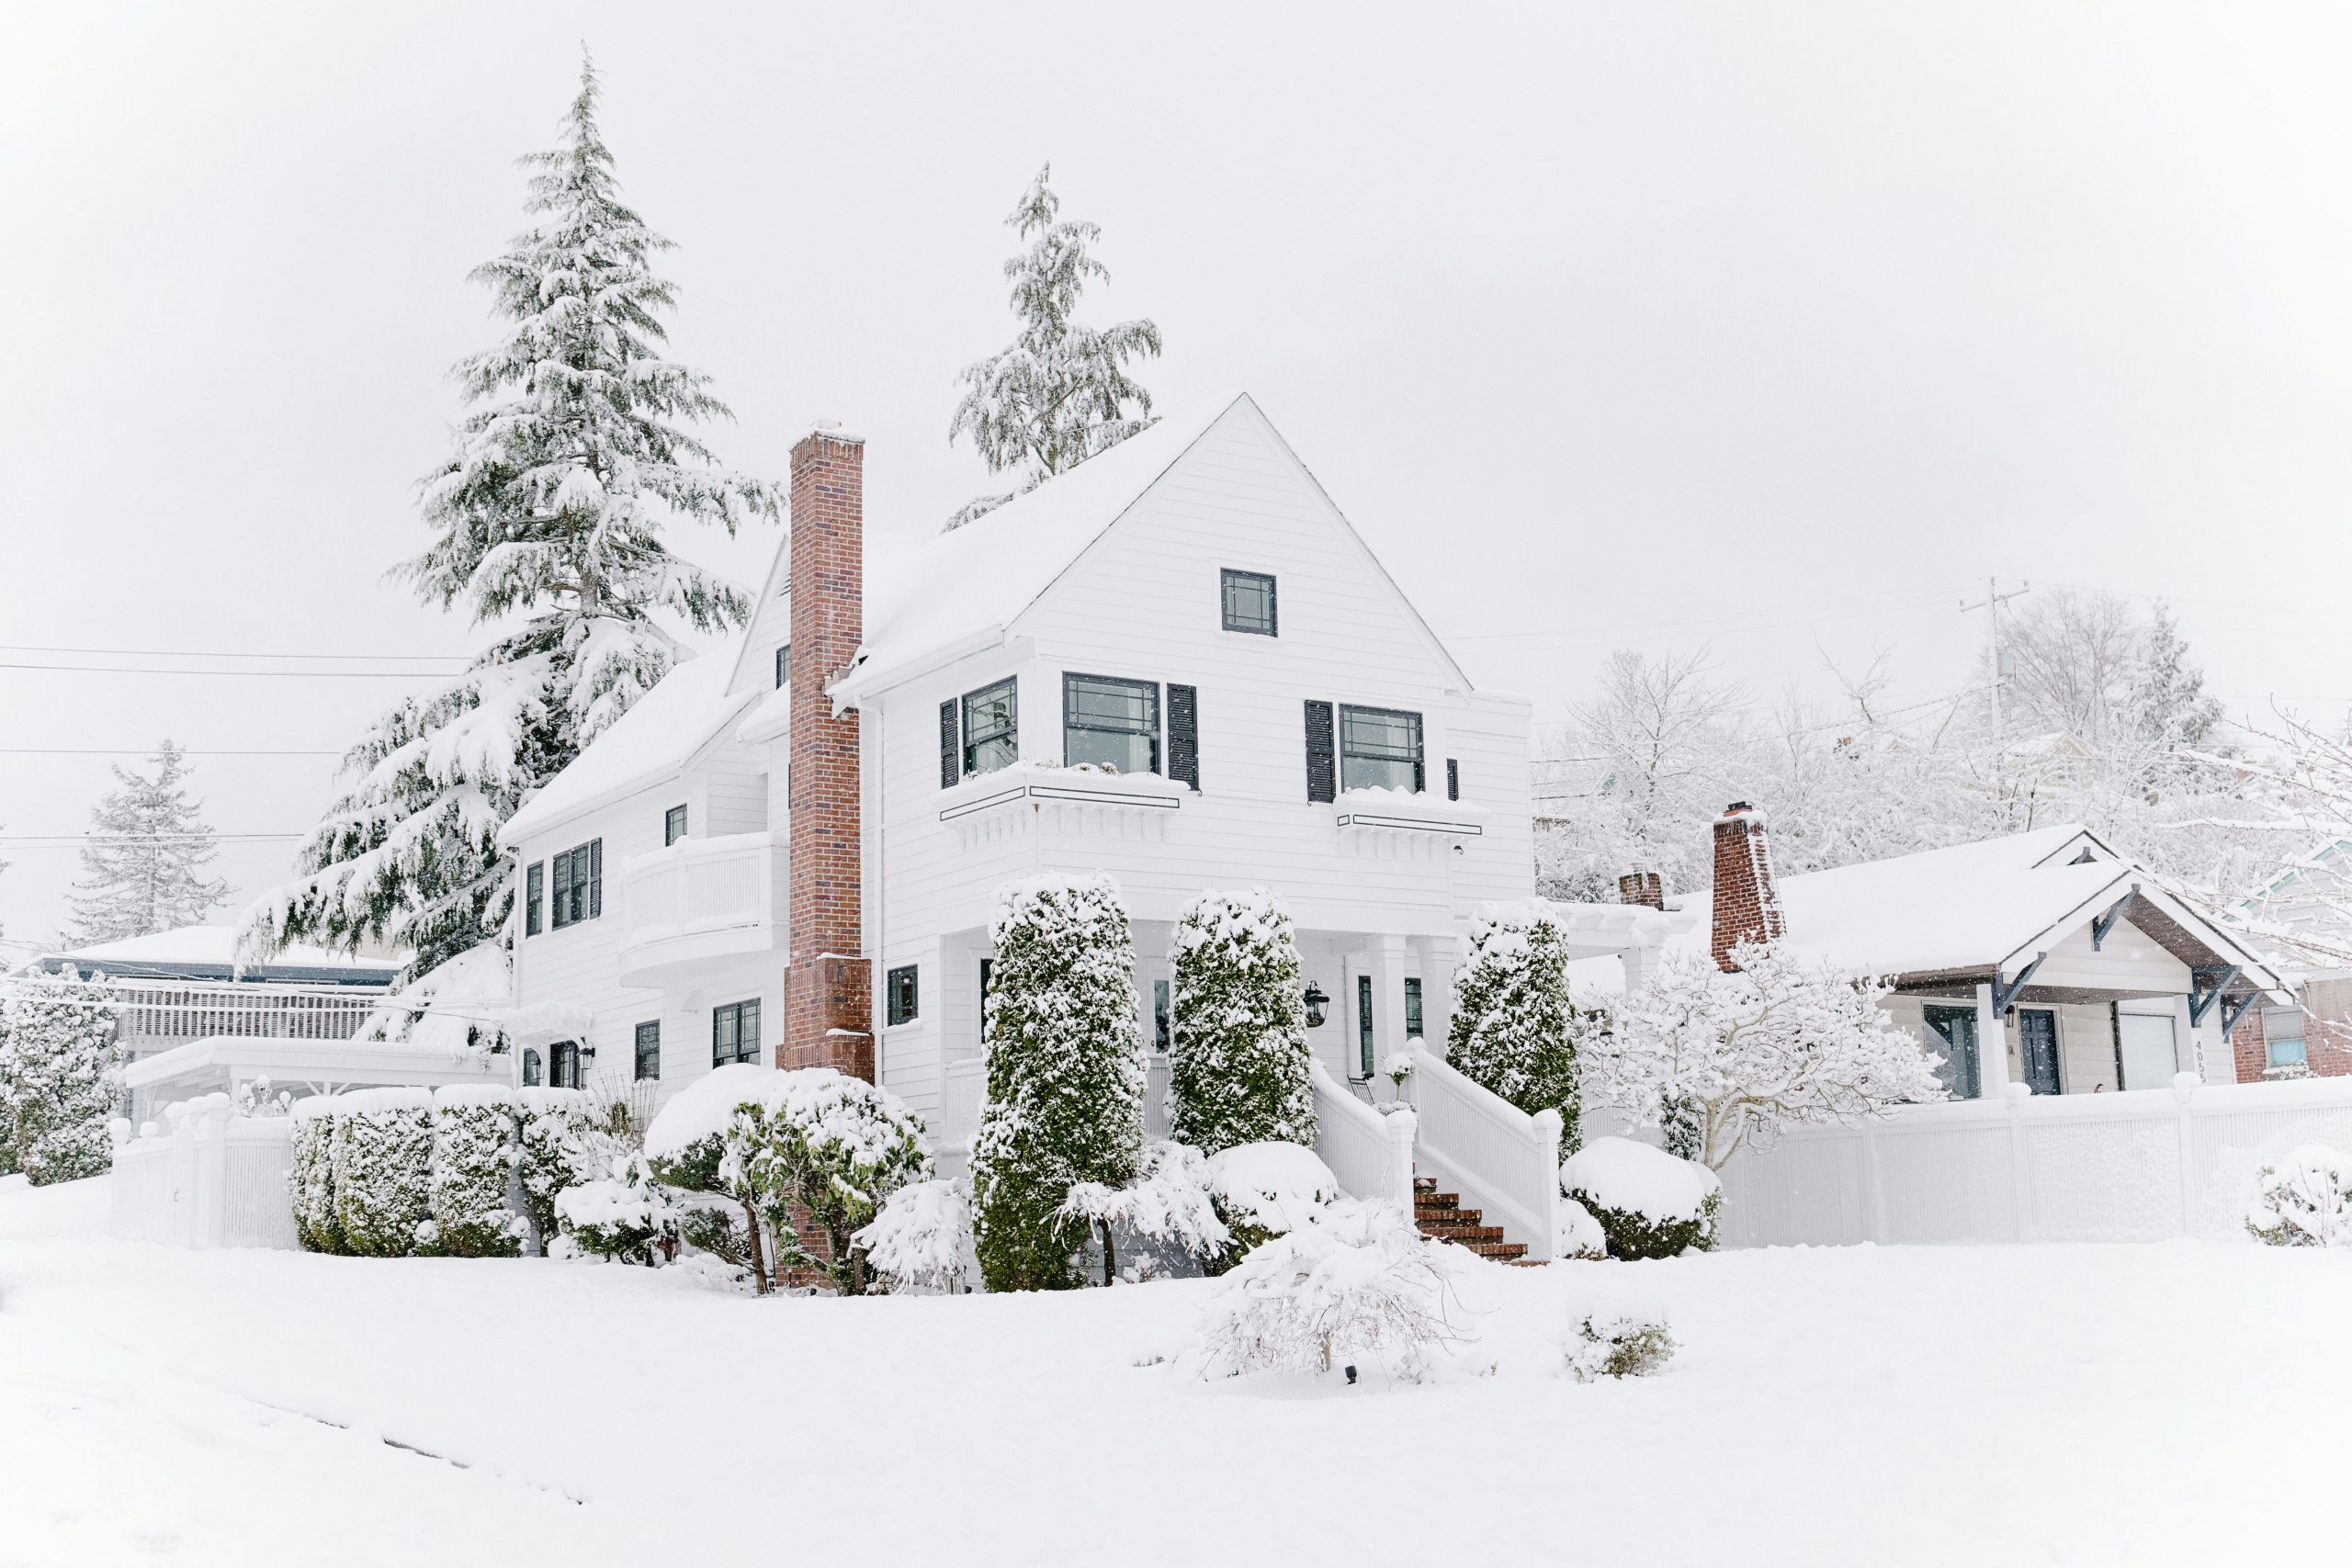 Home in the winter with snow on the roof and on the ground, schedule roof inspection before snowfall